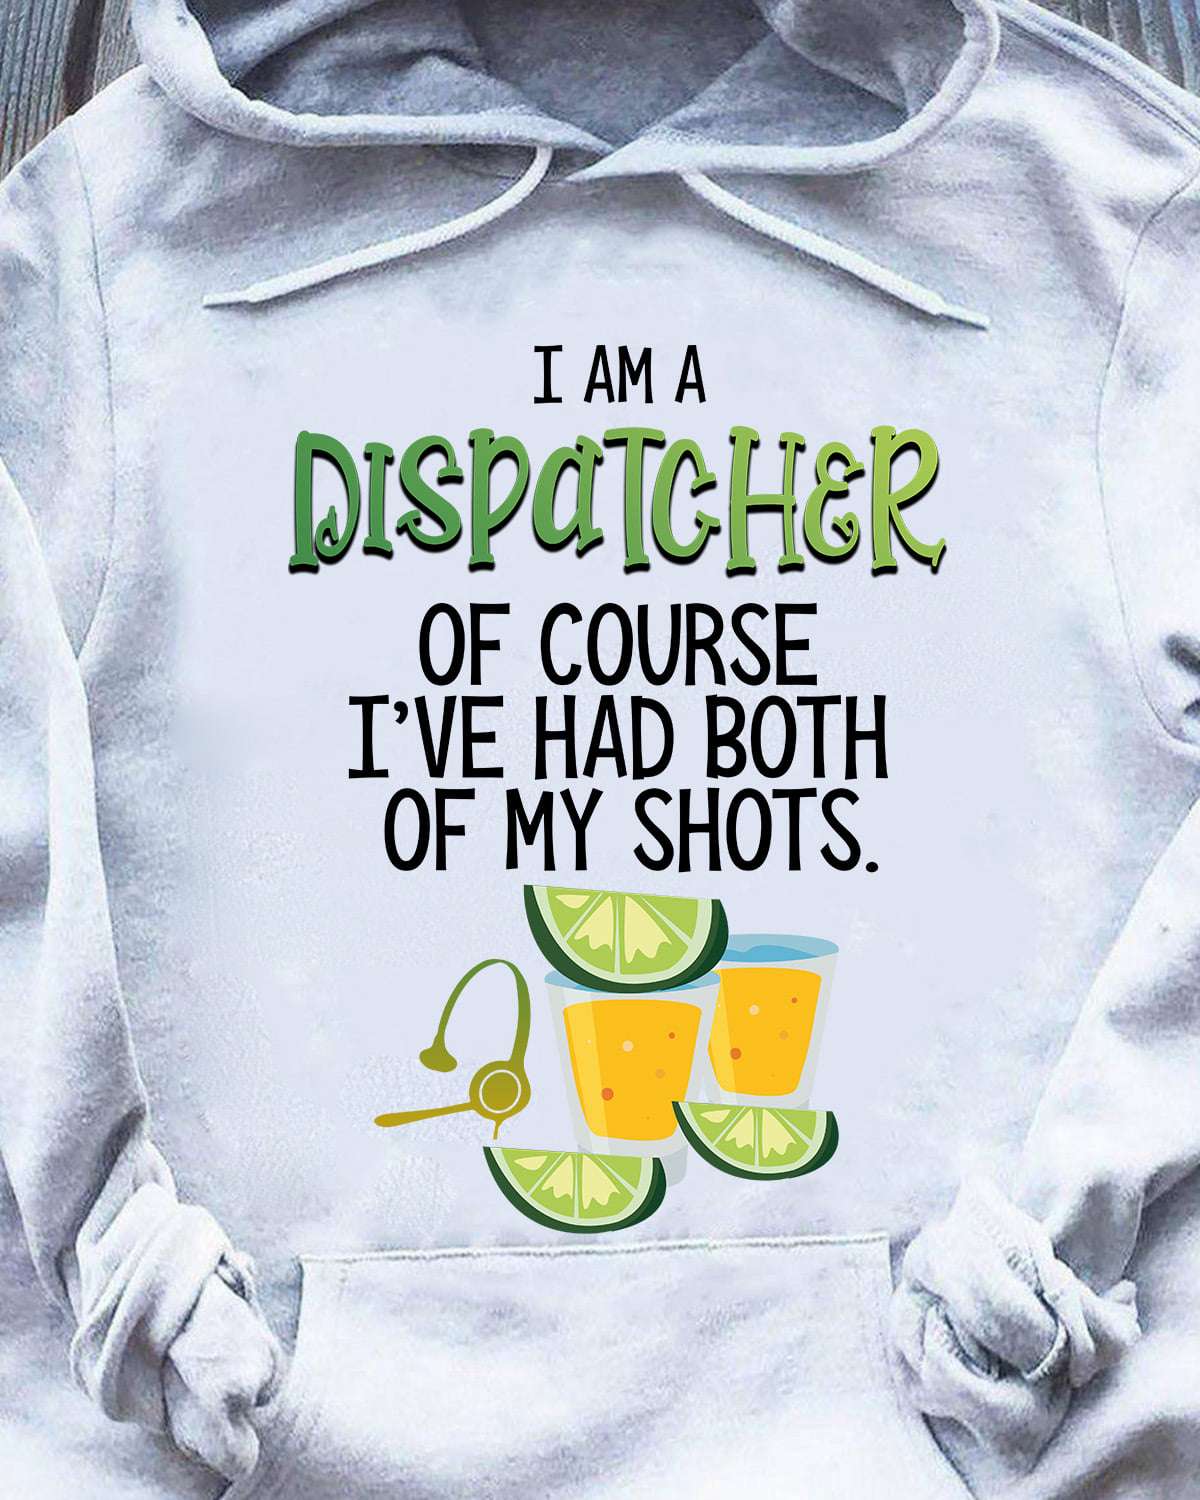 I am a dispatcher of course i've had both of my shots